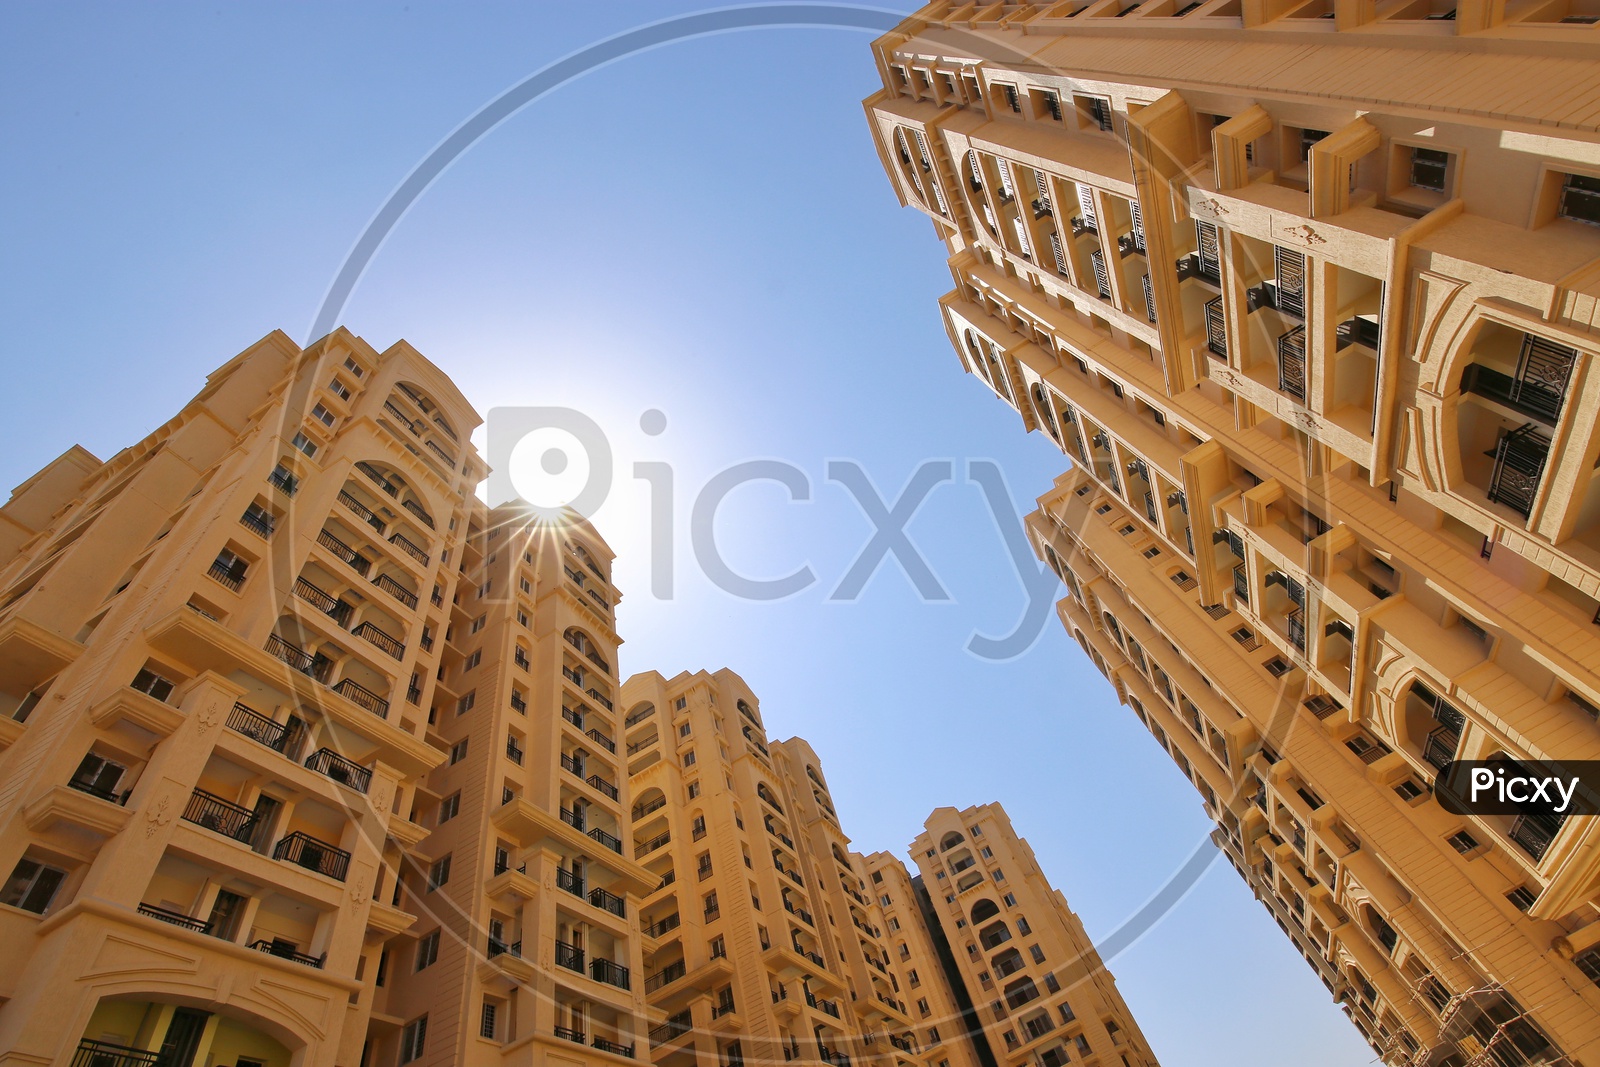 Aditya Empress heights Residential Apartments Or High Rise Buildings